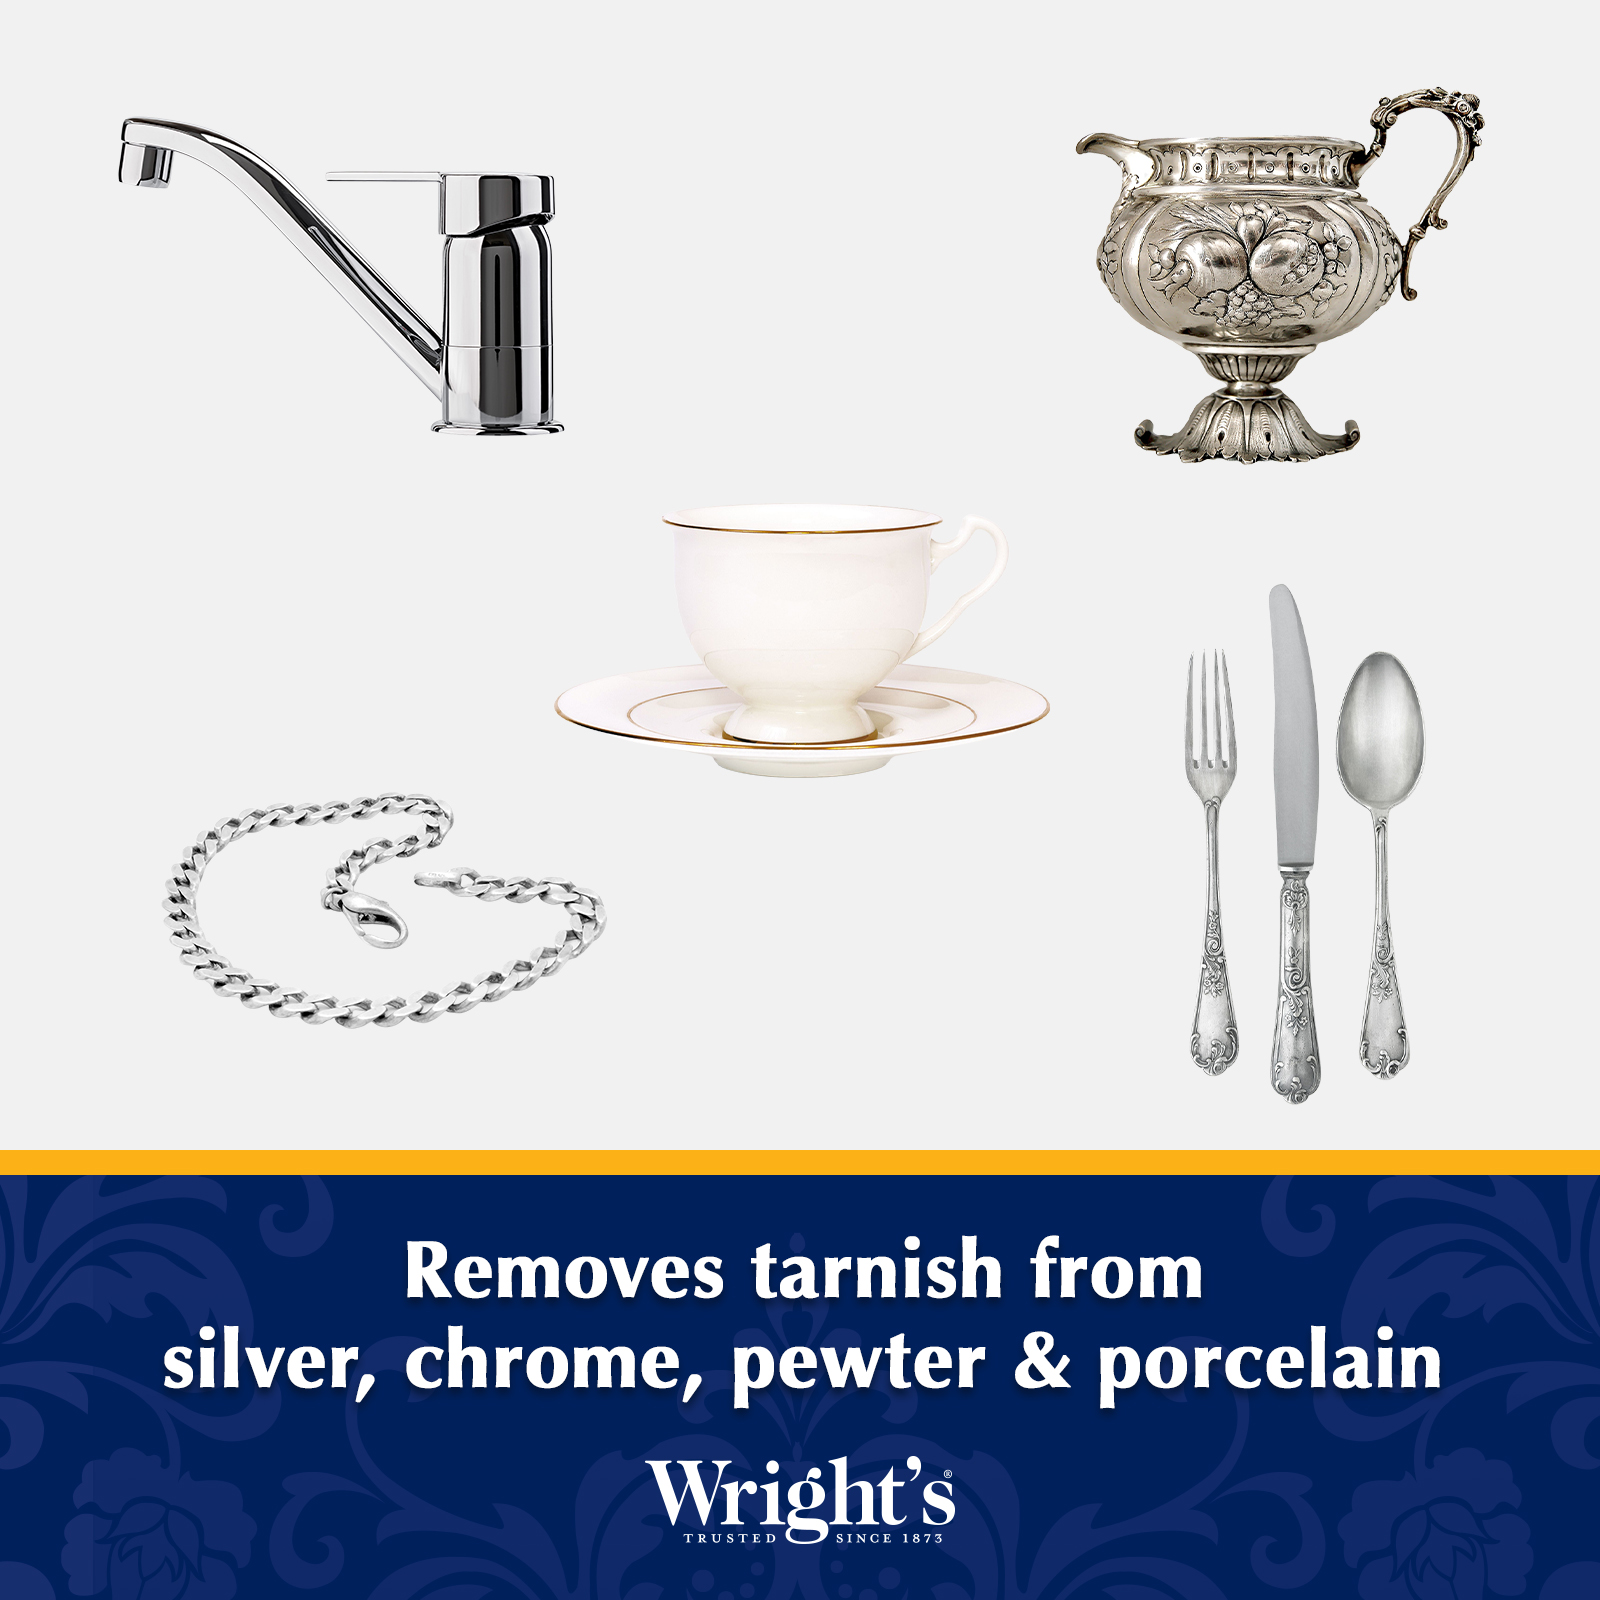 Wright's Silver and Metal Polish Cleaner - Removes Tarnish from Silver, 8 oz, Unscented - image 3 of 7